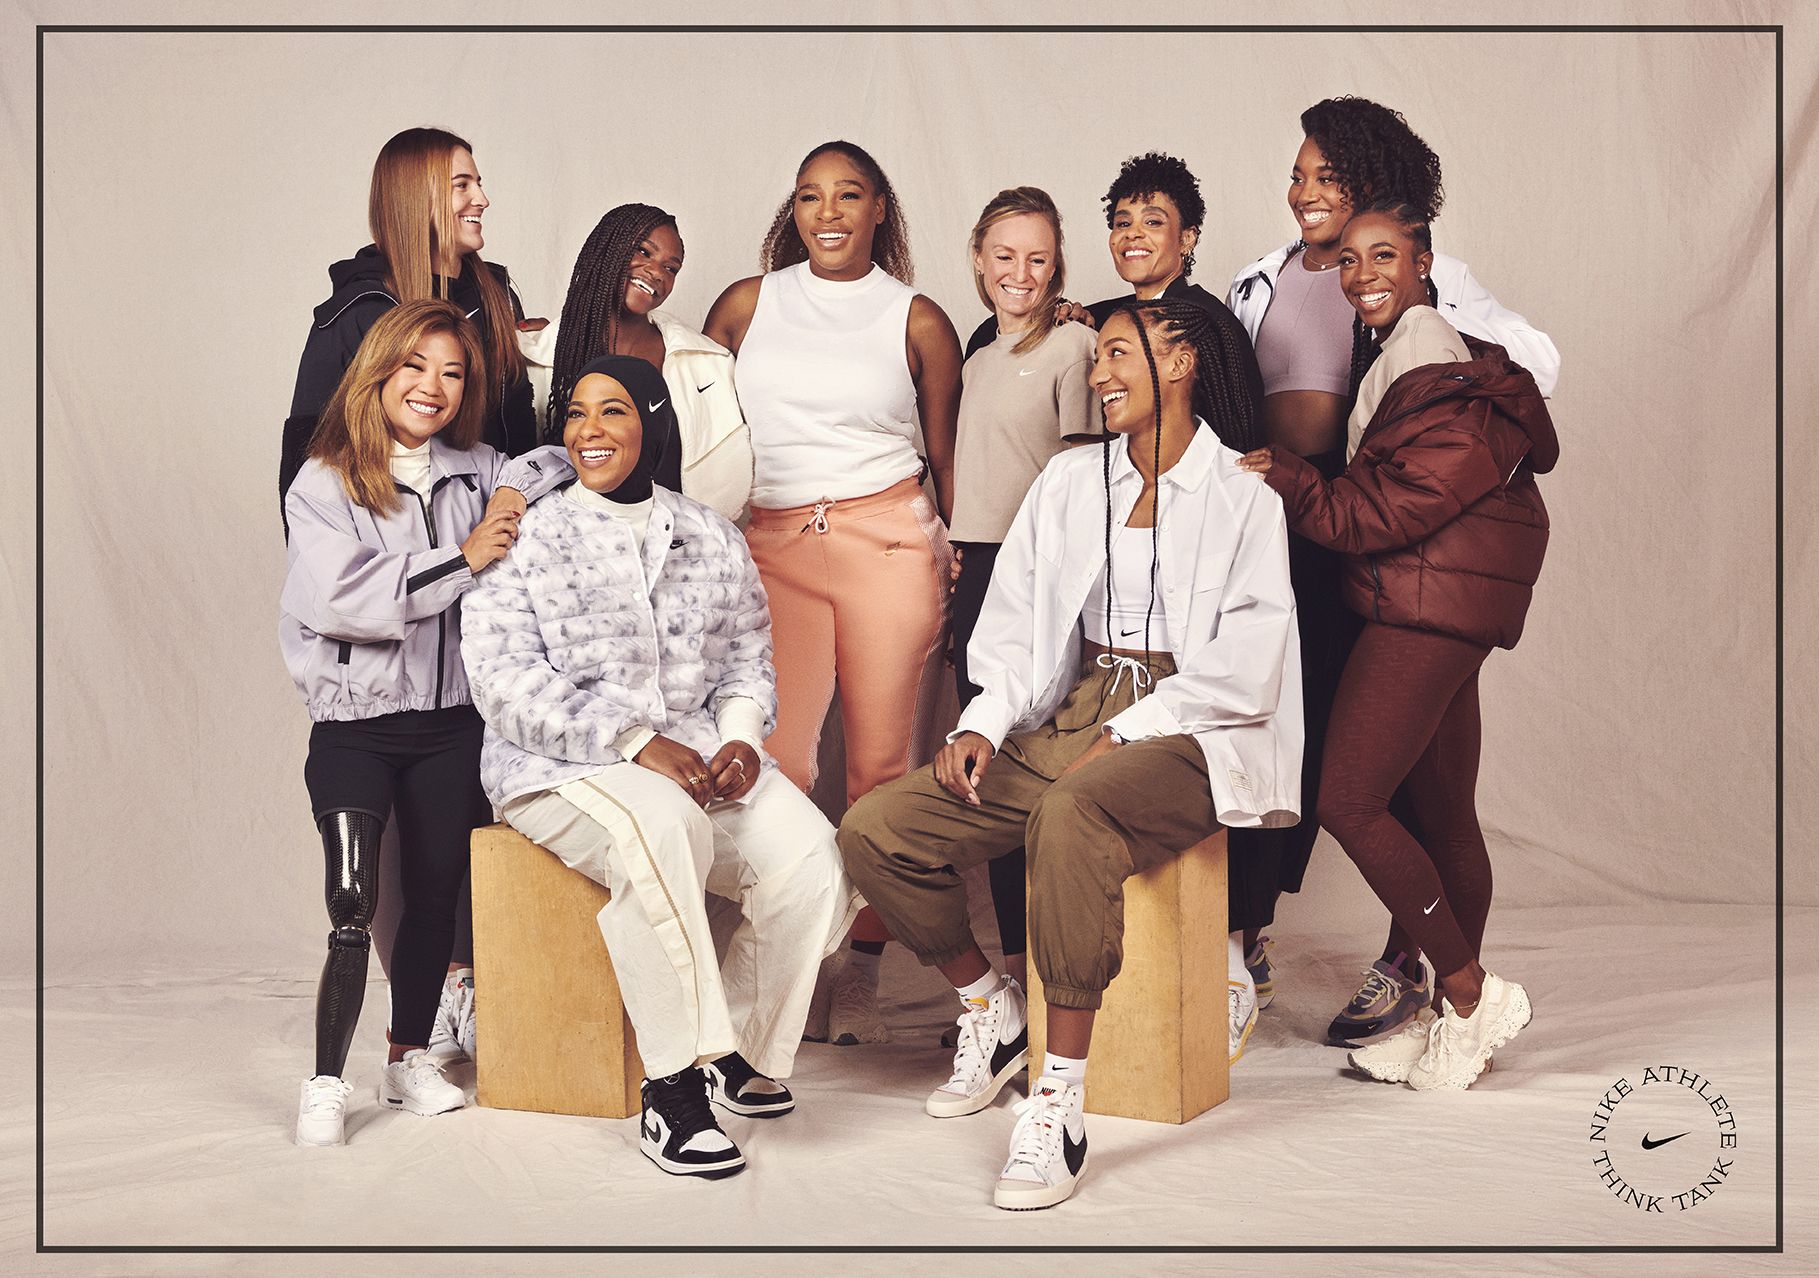 President Achternaam monster Nike Partners with 13 Women Athletes to Bring Equality to Sports